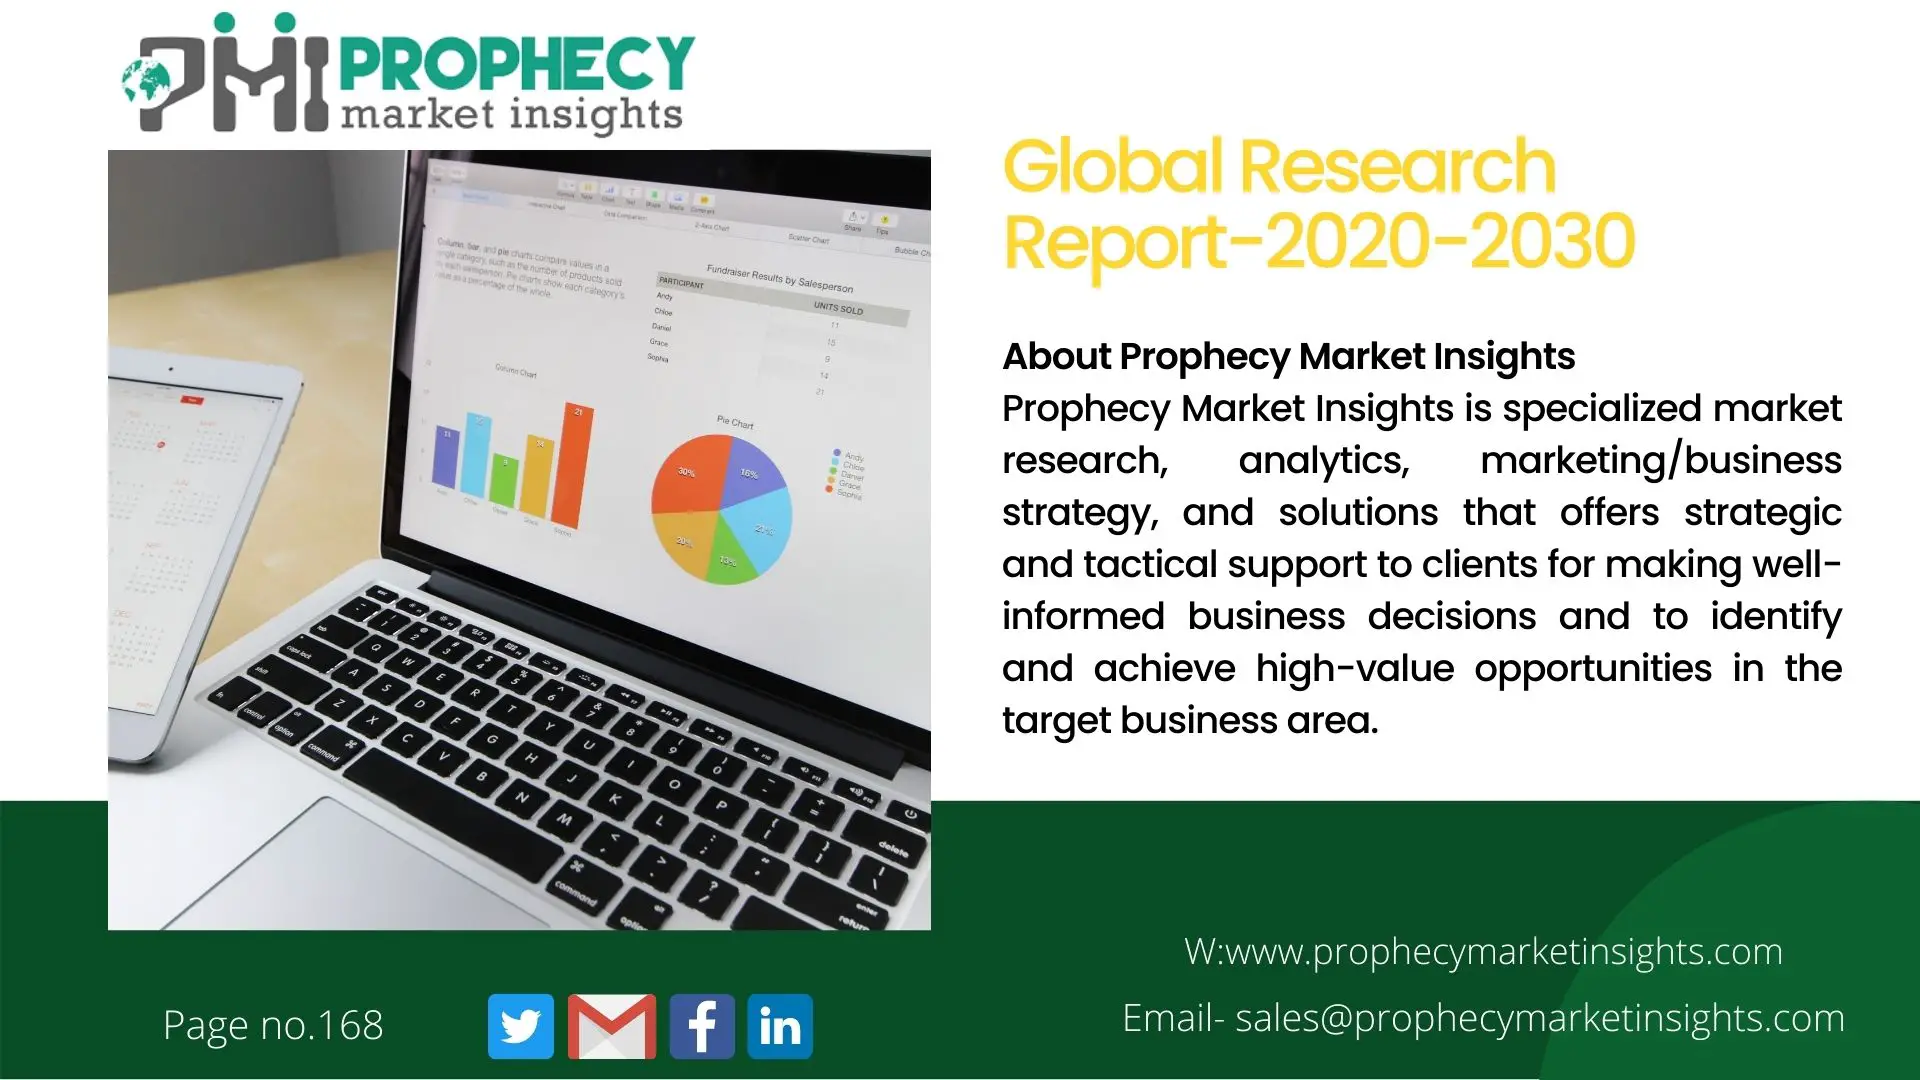 Global Research Report-2020-2030-2e068bed